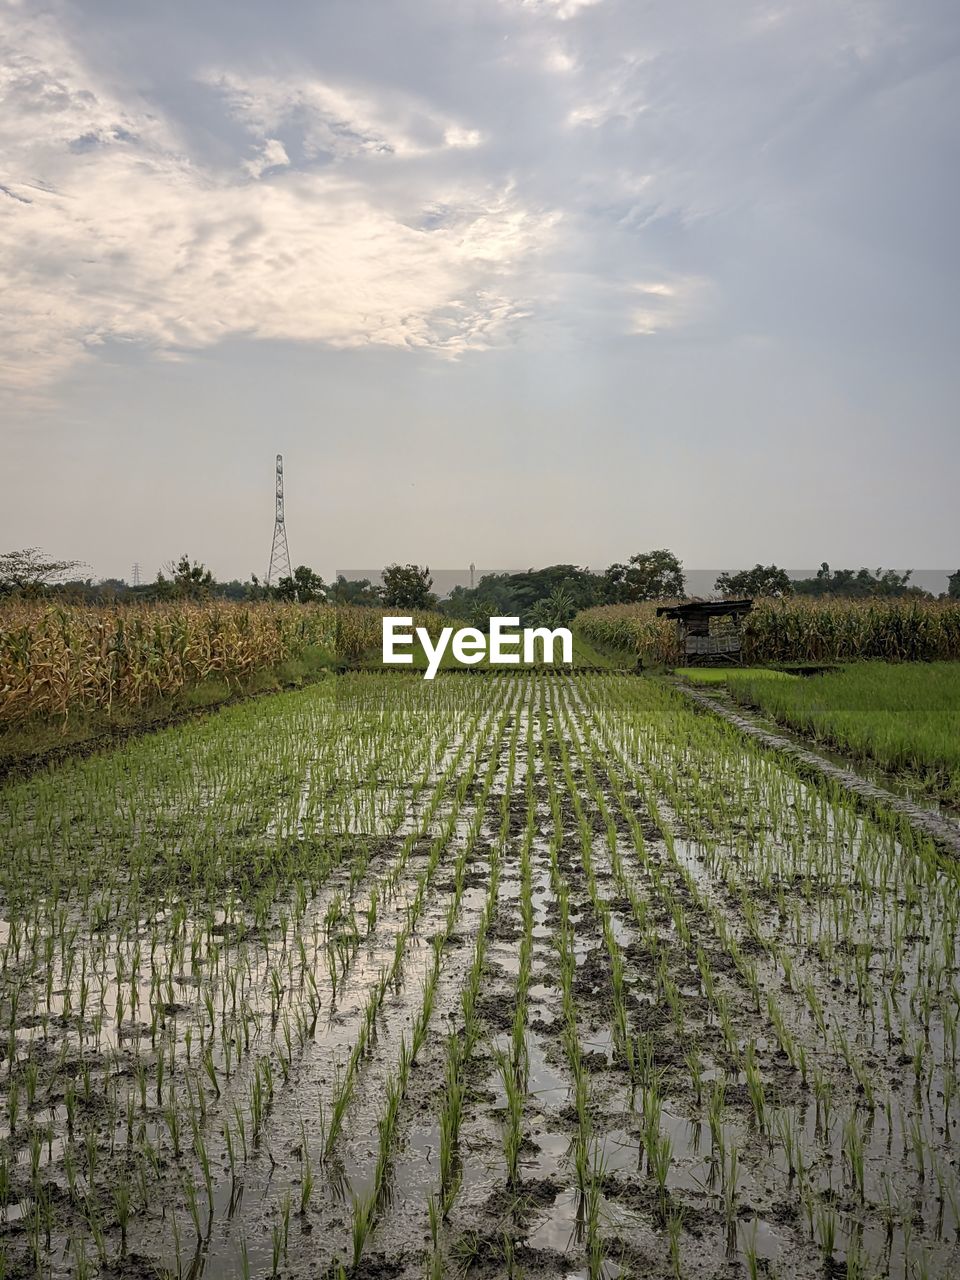 agriculture, landscape, environment, rural scene, field, sky, plant, crop, land, food and drink, growth, farm, nature, food, cloud, rural area, social issues, scenics - nature, paddy field, vegetable, beauty in nature, grass, no people, in a row, environmental conservation, water, outdoors, flower, tranquility, cereal plant, freshness, rice - food staple, plain, green, horizon, rice, rice paddy, healthy eating, tree, morning, business finance and industry, soil